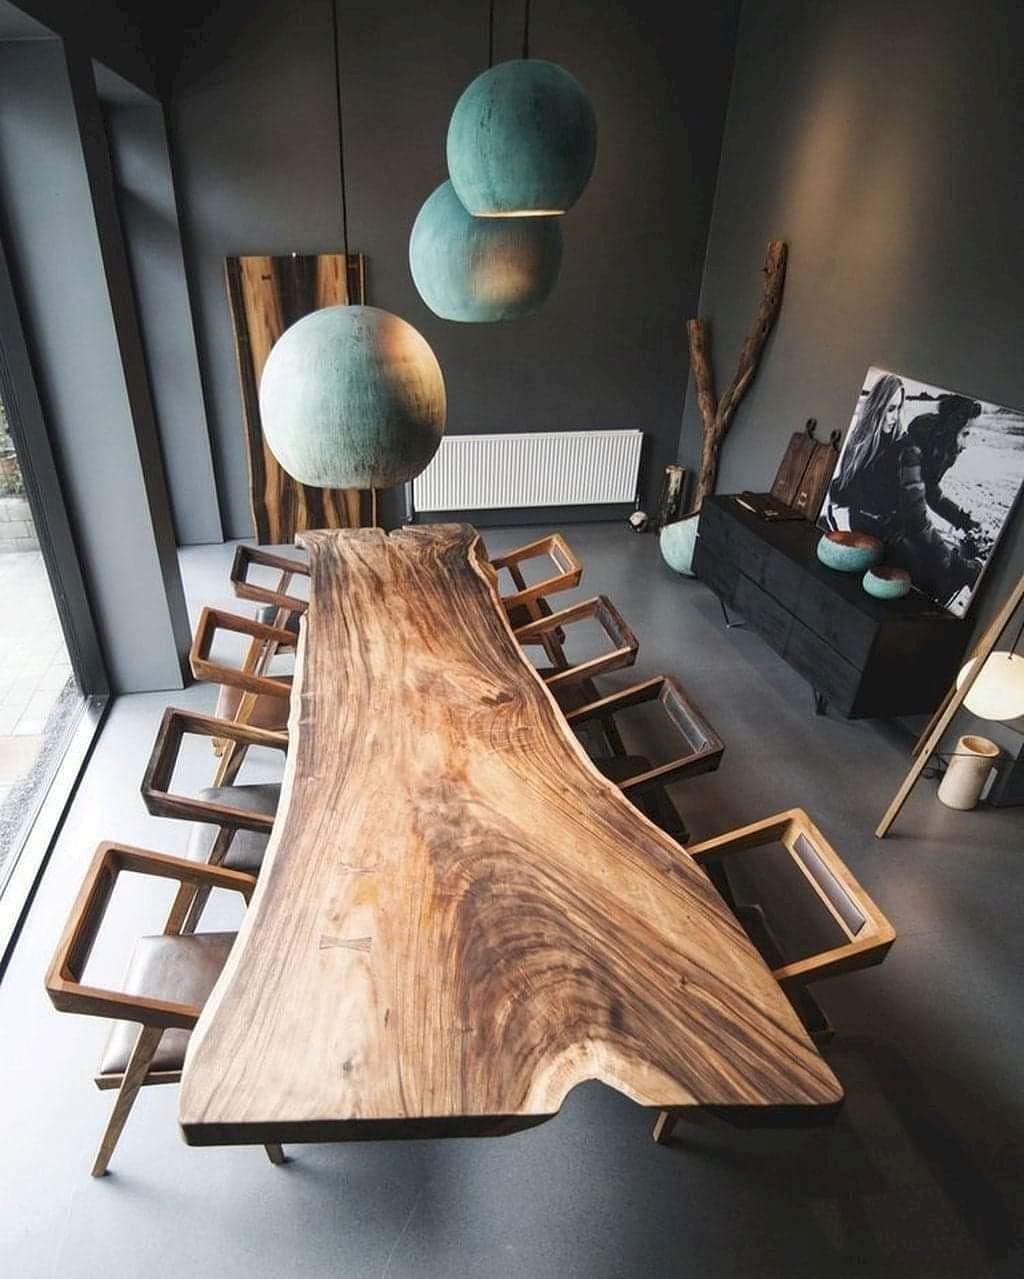 18 Unique Wood Table Ideas for Modern Designs 2019 - Page 8 of 18 - My Blog